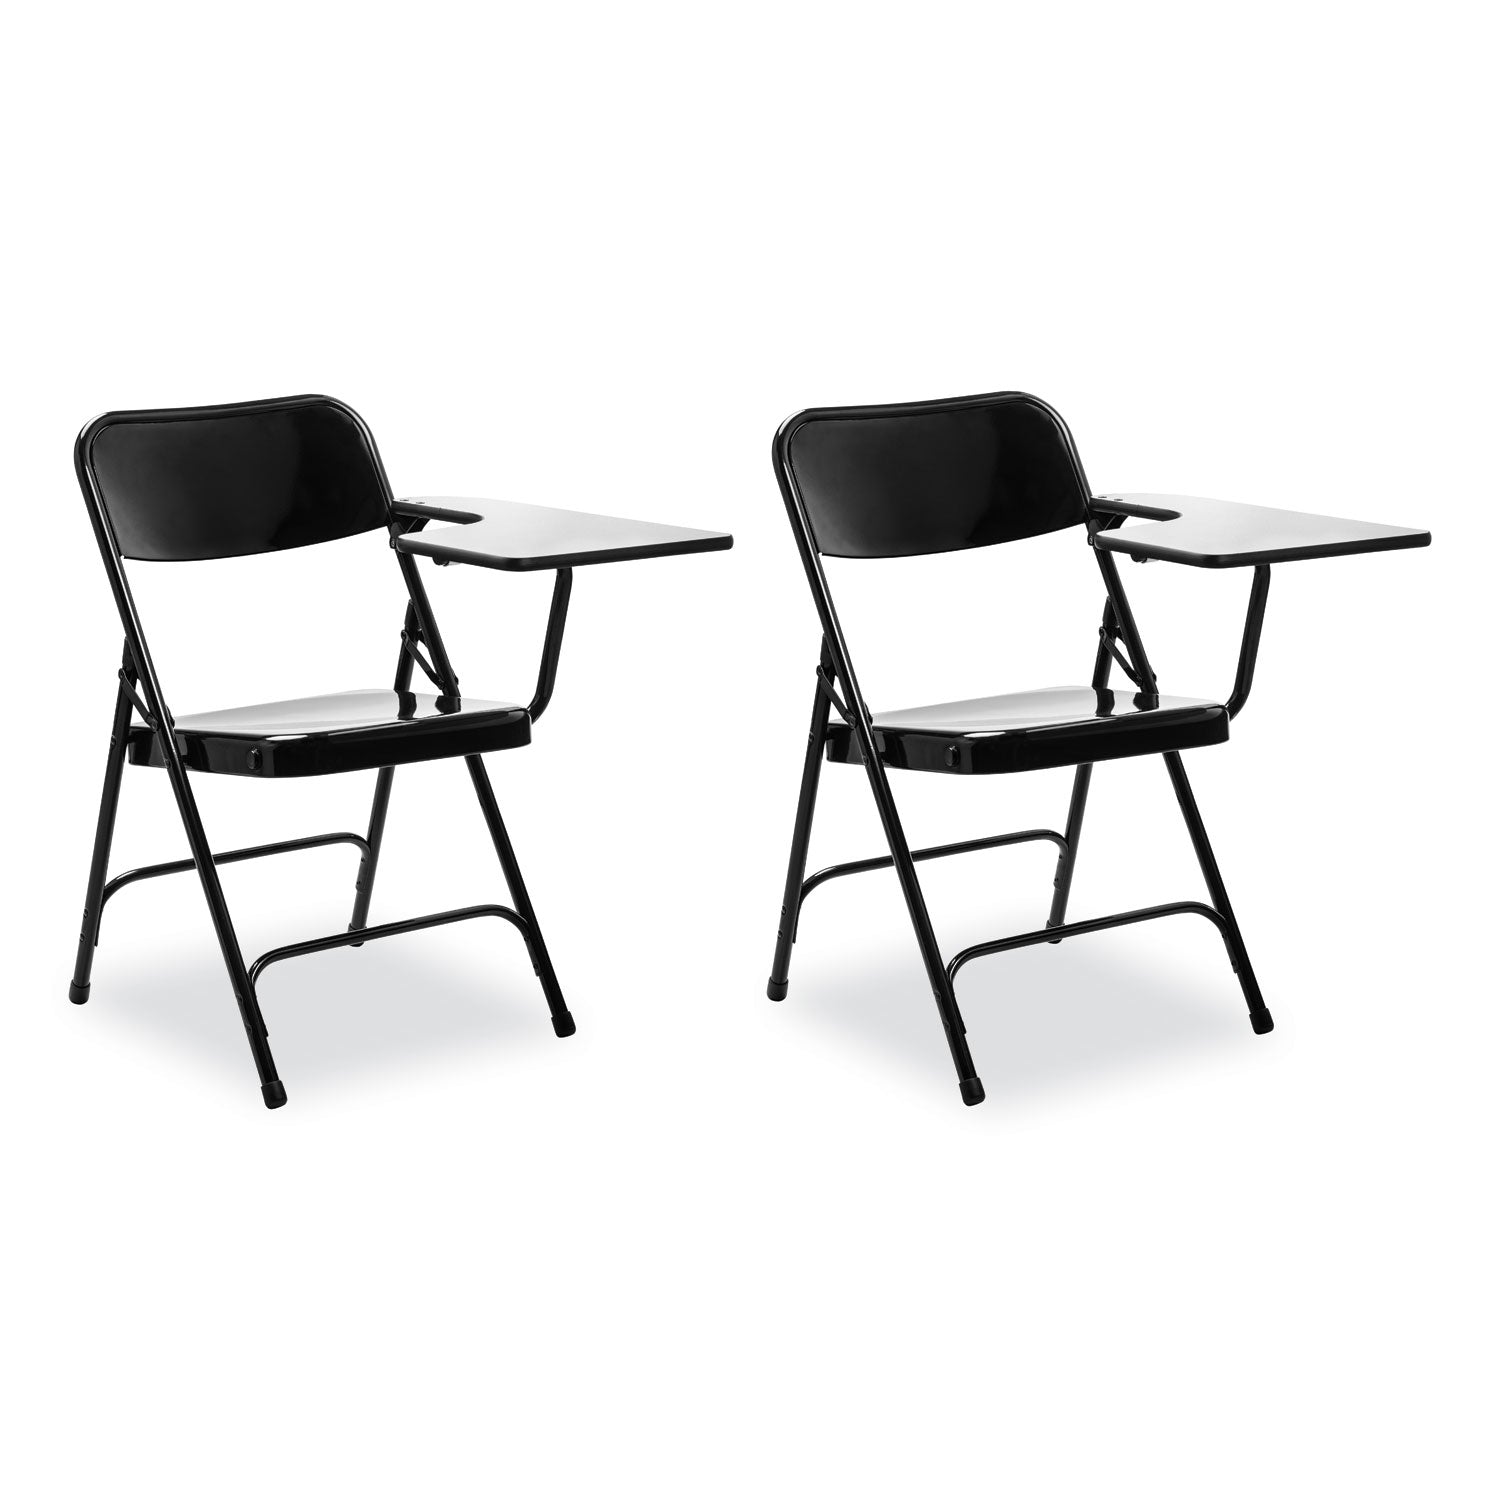 5200 Series Left-Side Tablet-Arm Folding Chair, Supports 480 lb, 17.25" Seat Height, Black, 2/Carton, Ships in 1-3 Bus Days - 1